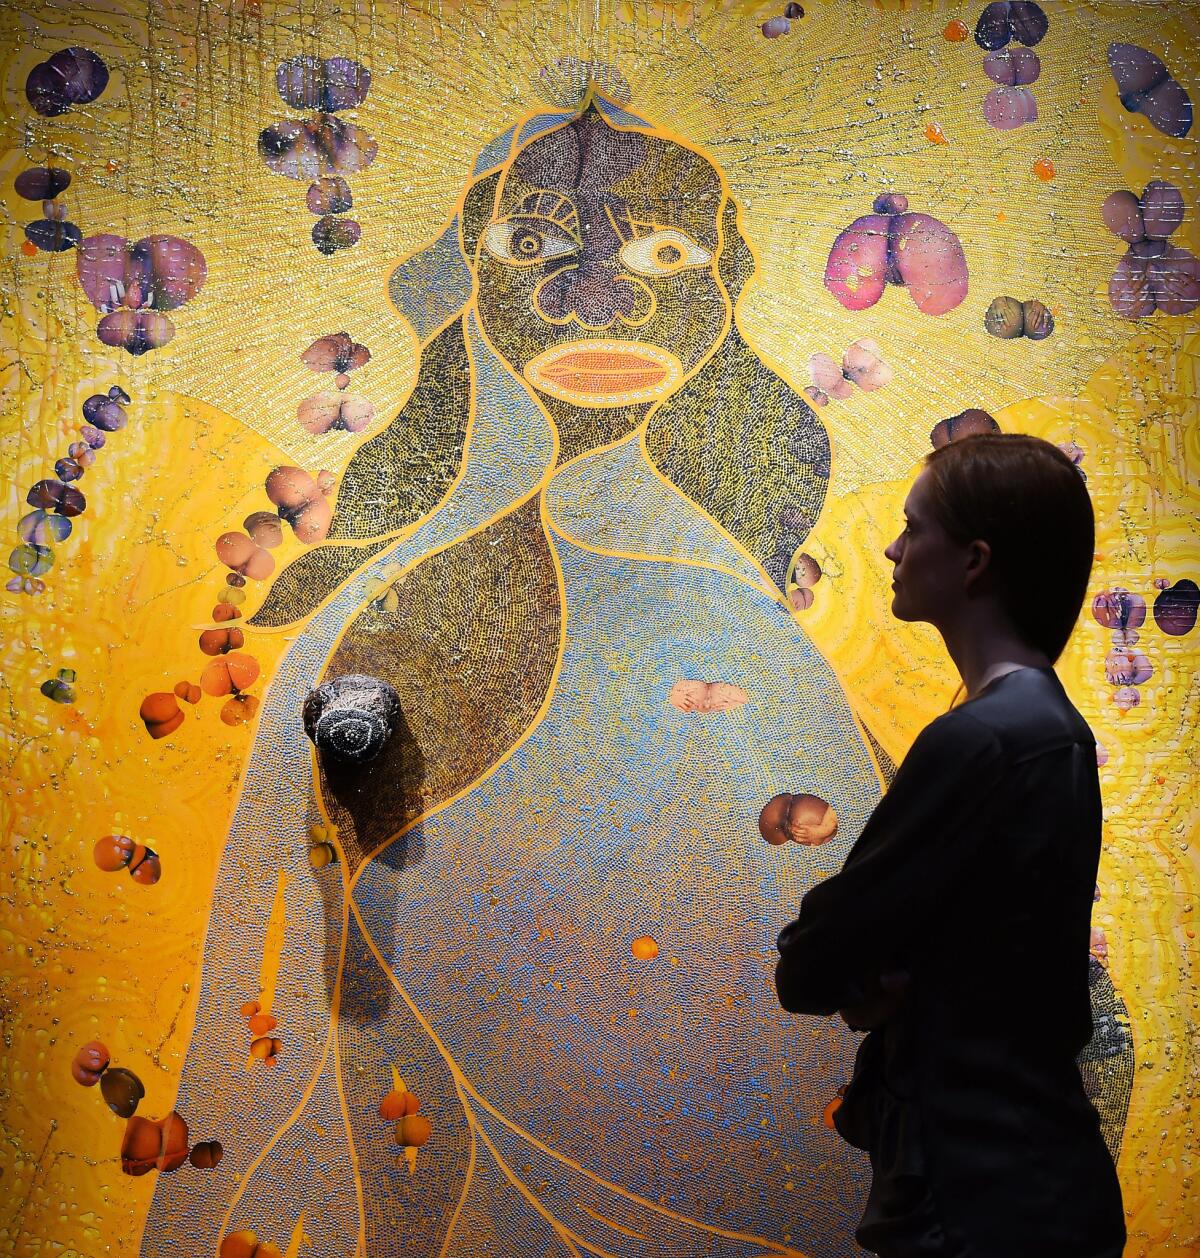 Chris Ofili's portrait "The Holy Virgin Mary" sold at Christie's for about $4.5 million.